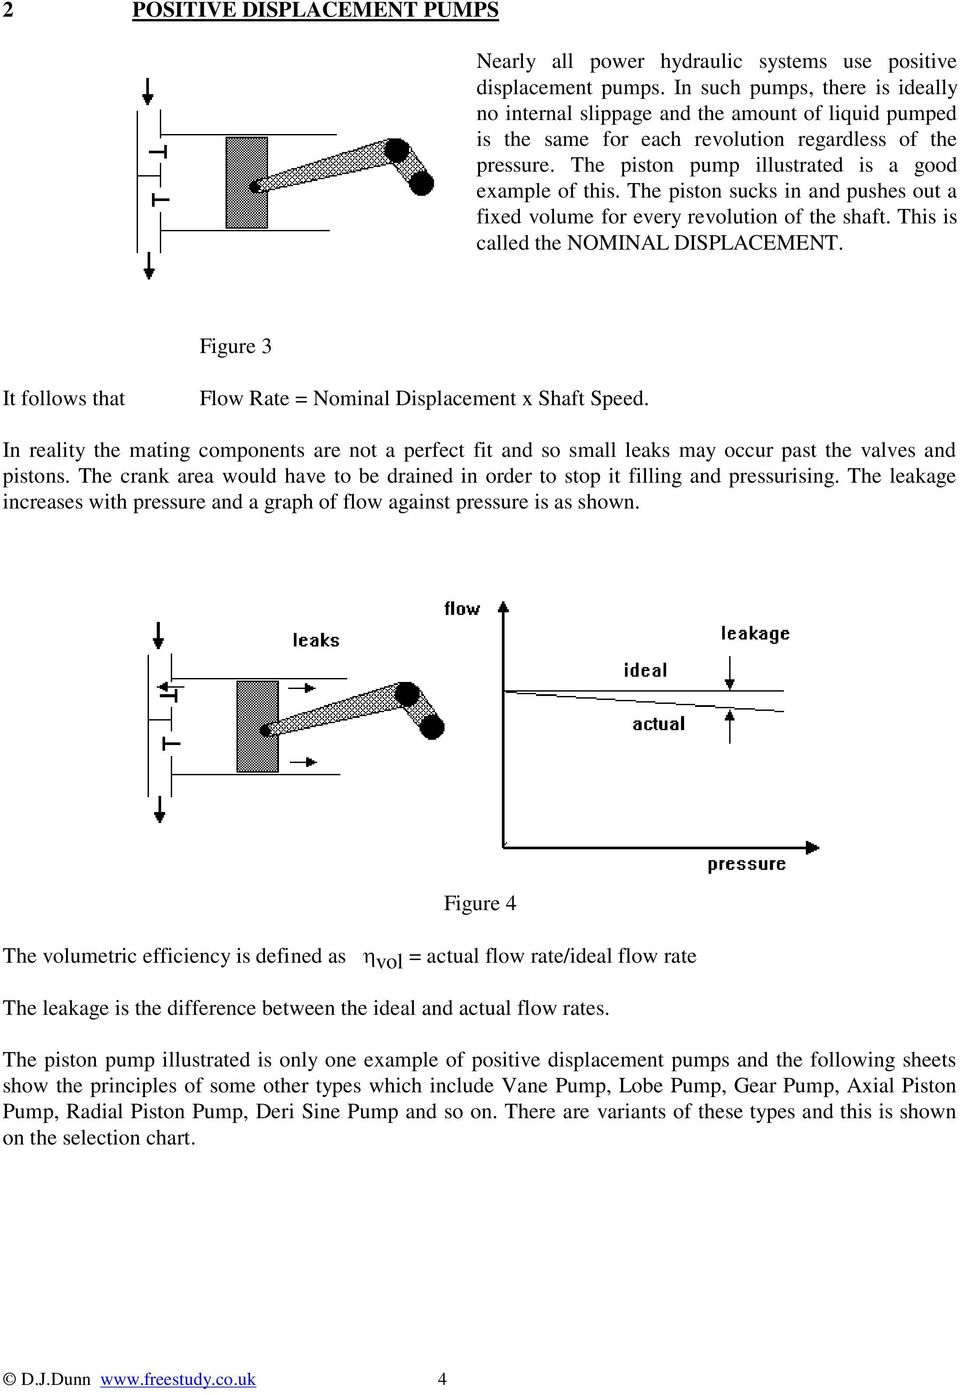 The piston sucks in and pushes out a fixed volume for every revolution of the shaft. This is called the NOMINAL DISPLACEMENT. Figure 3 It follows that Flow Rate = Nominal Displacement x Shaft Speed.